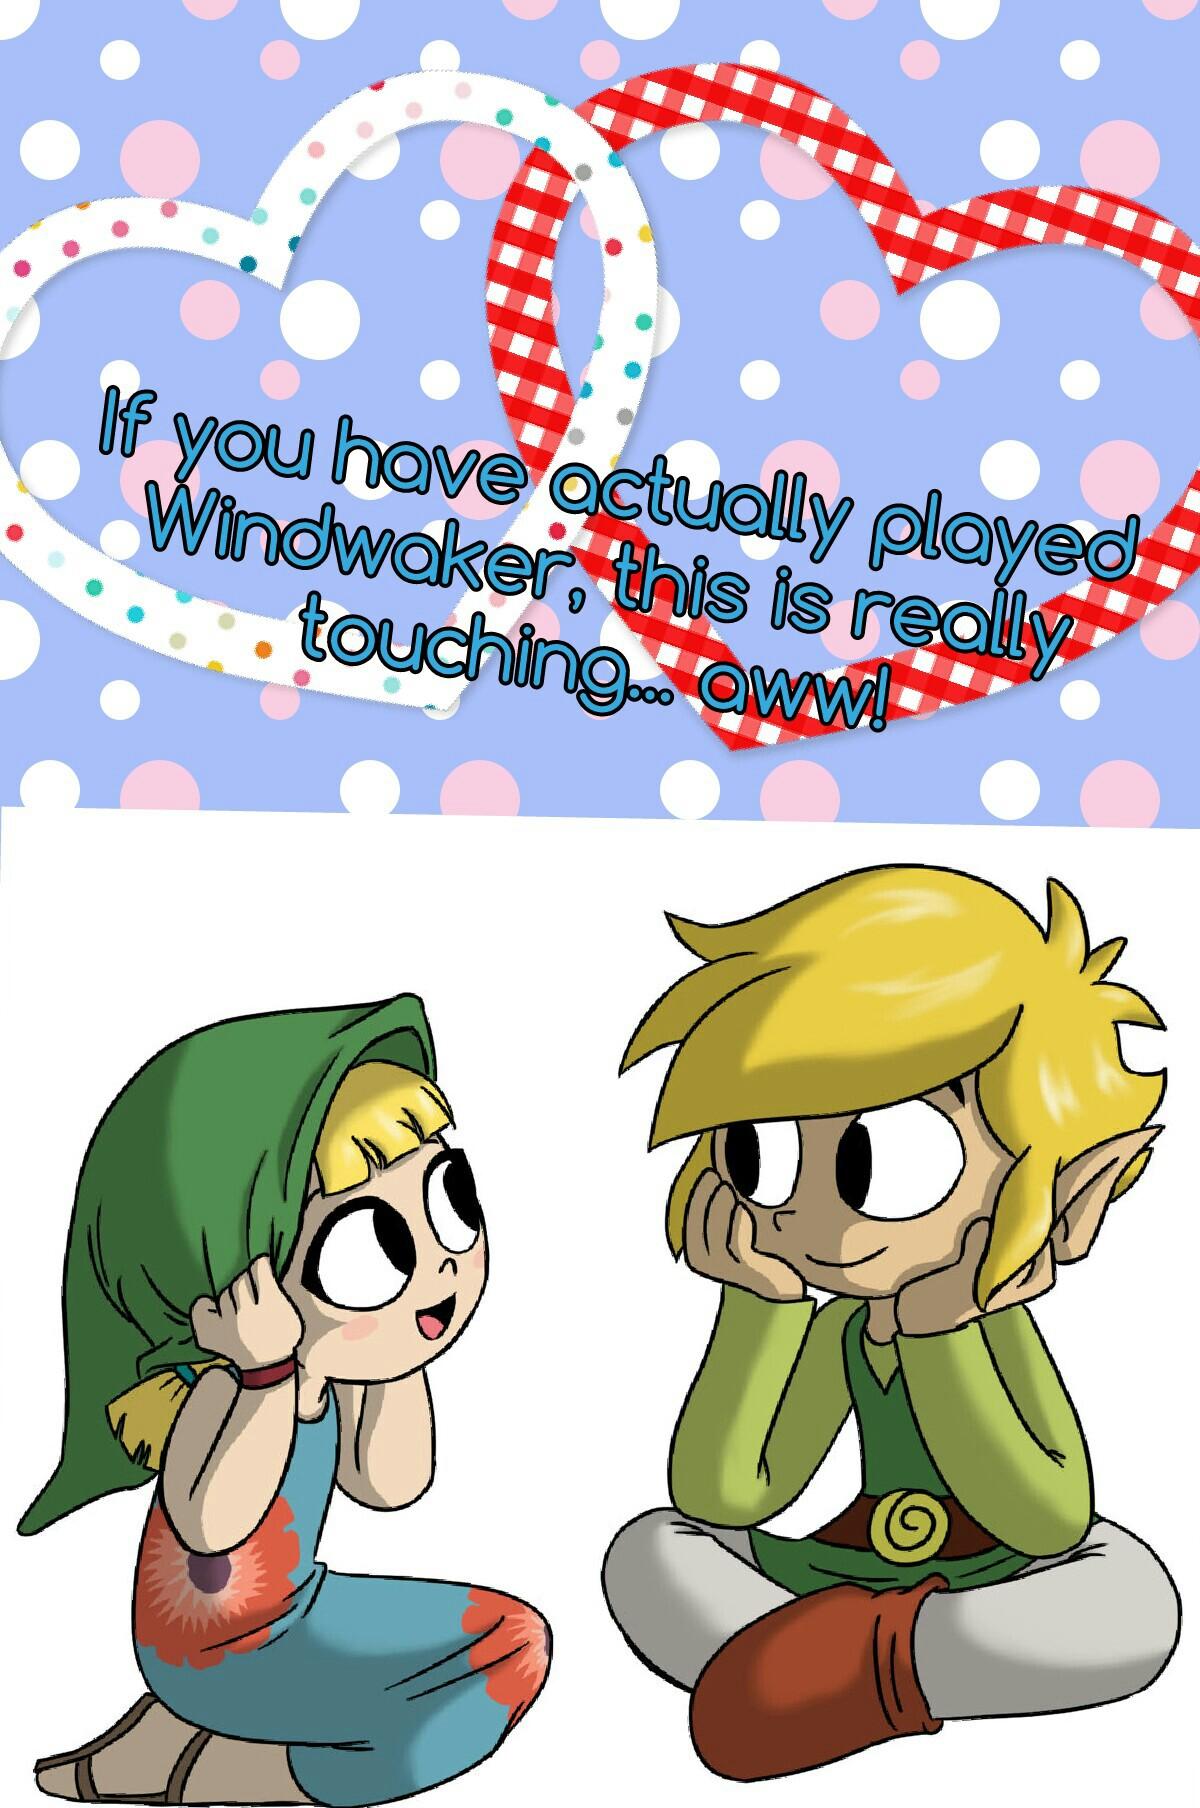 If you have actually played
Windwaker, this is really
touching... aww!